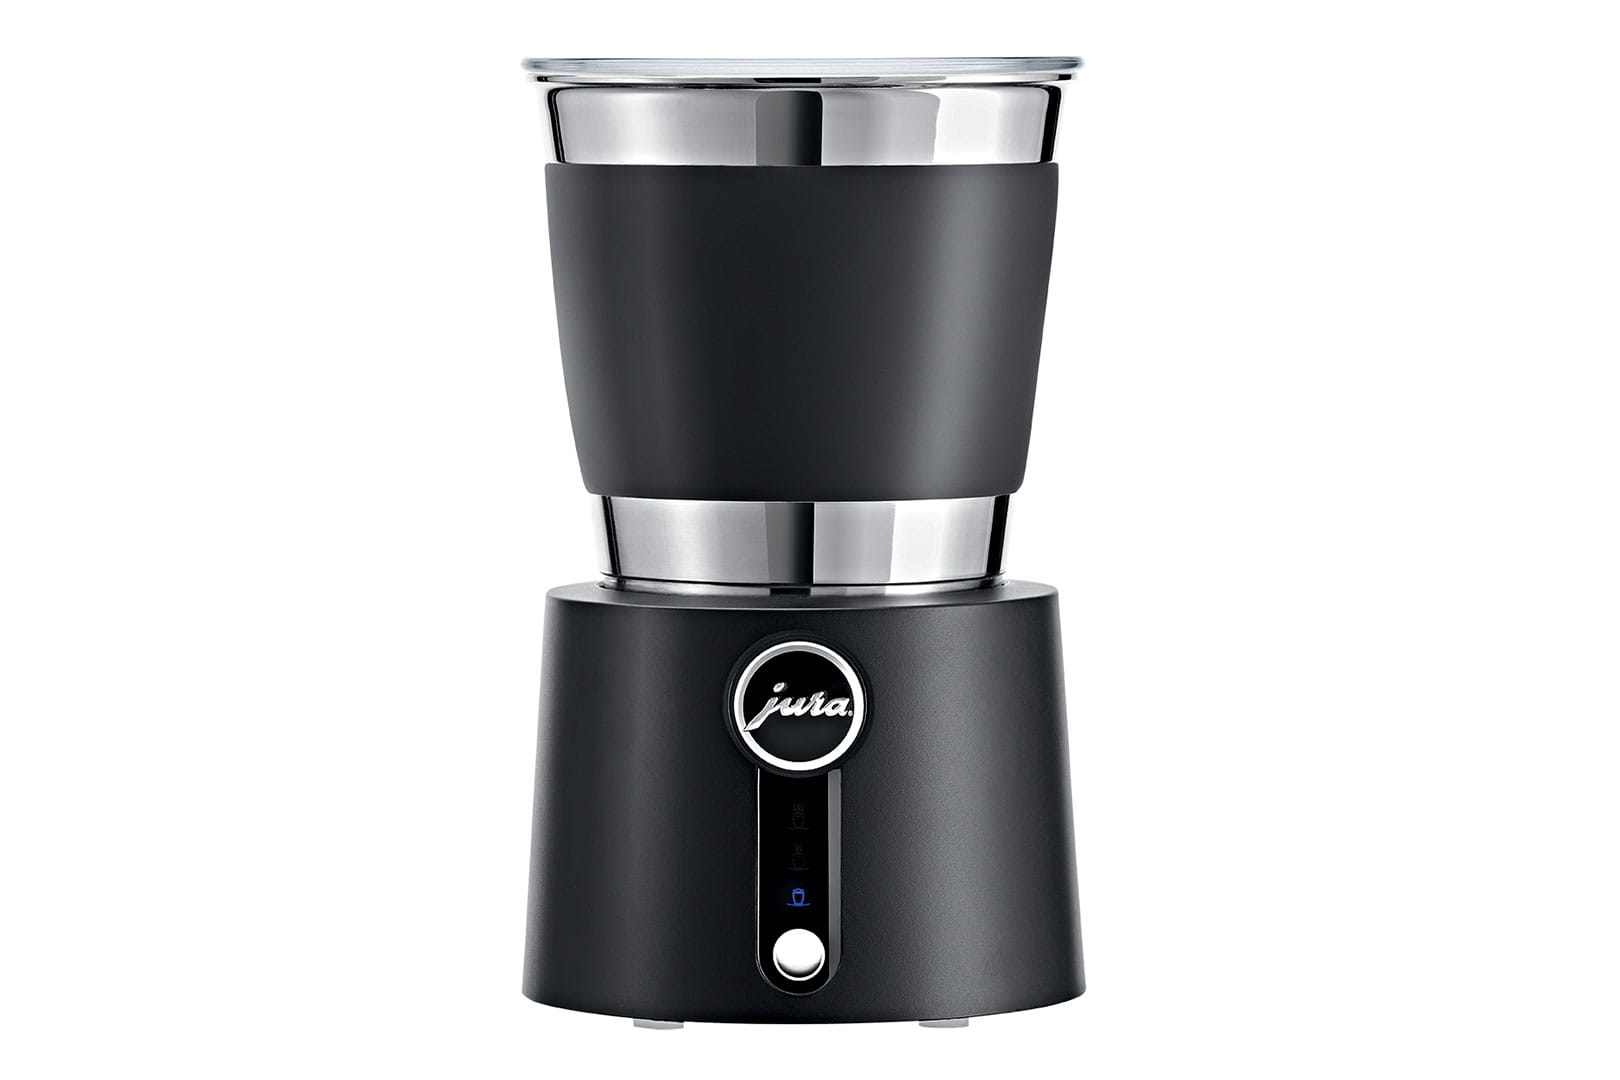 https://www.jura.com/-/media/global/images/home-products/milk-frother/image-gallery-milk-frother-hot-and-cold/milkfrother1.jpg